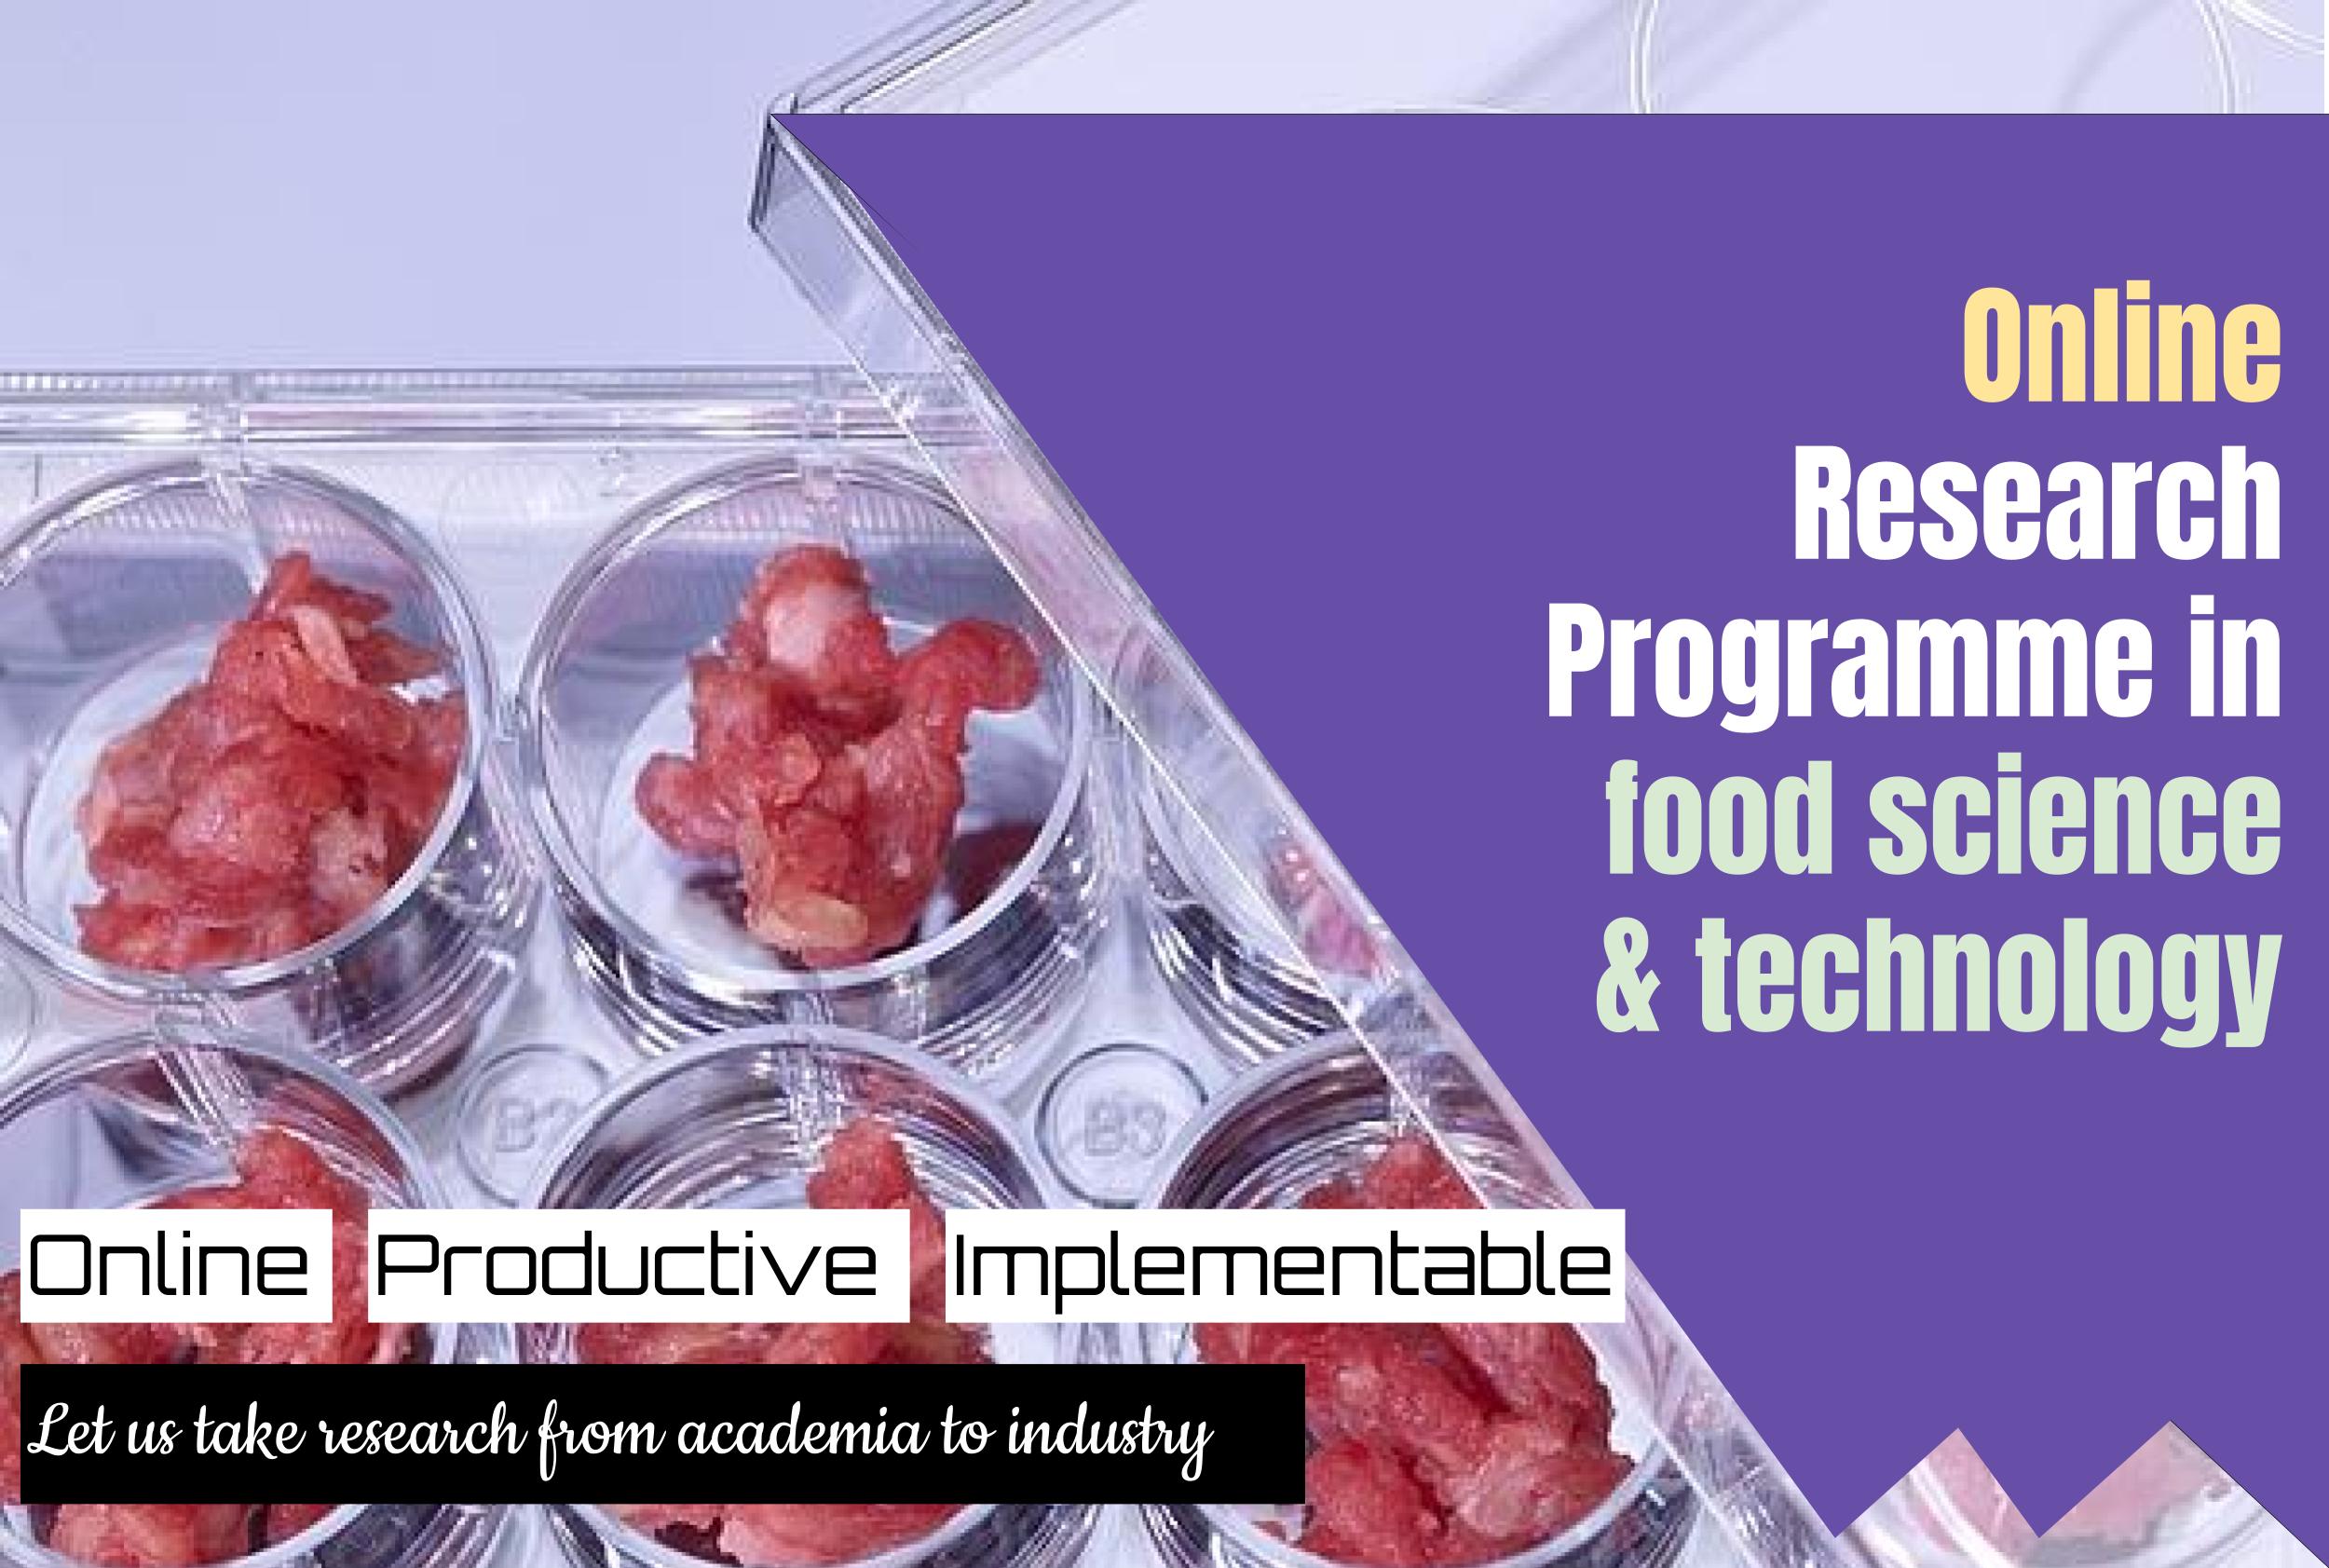 Online research programme in food science and technology